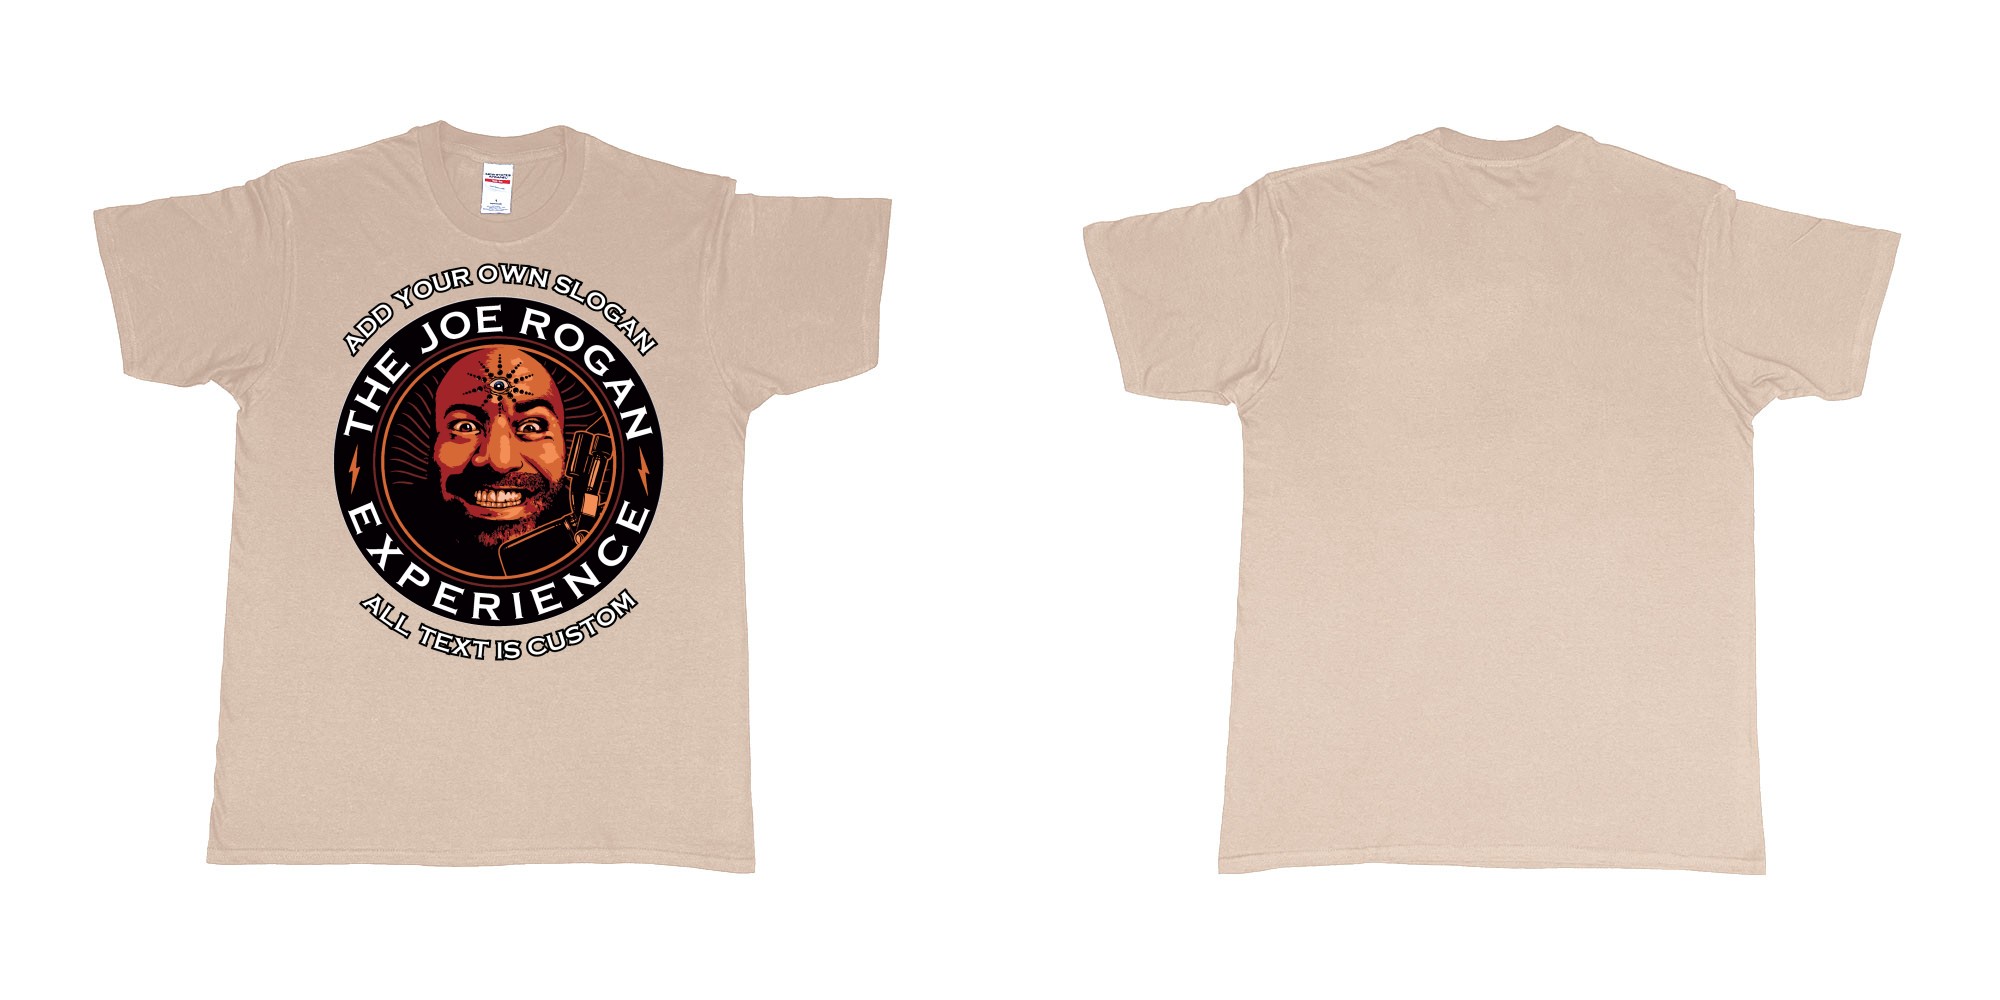 Custom tshirt design the joe rogan experience custom tshirt in fabric color sand choice your own text made in Bali by The Pirate Way